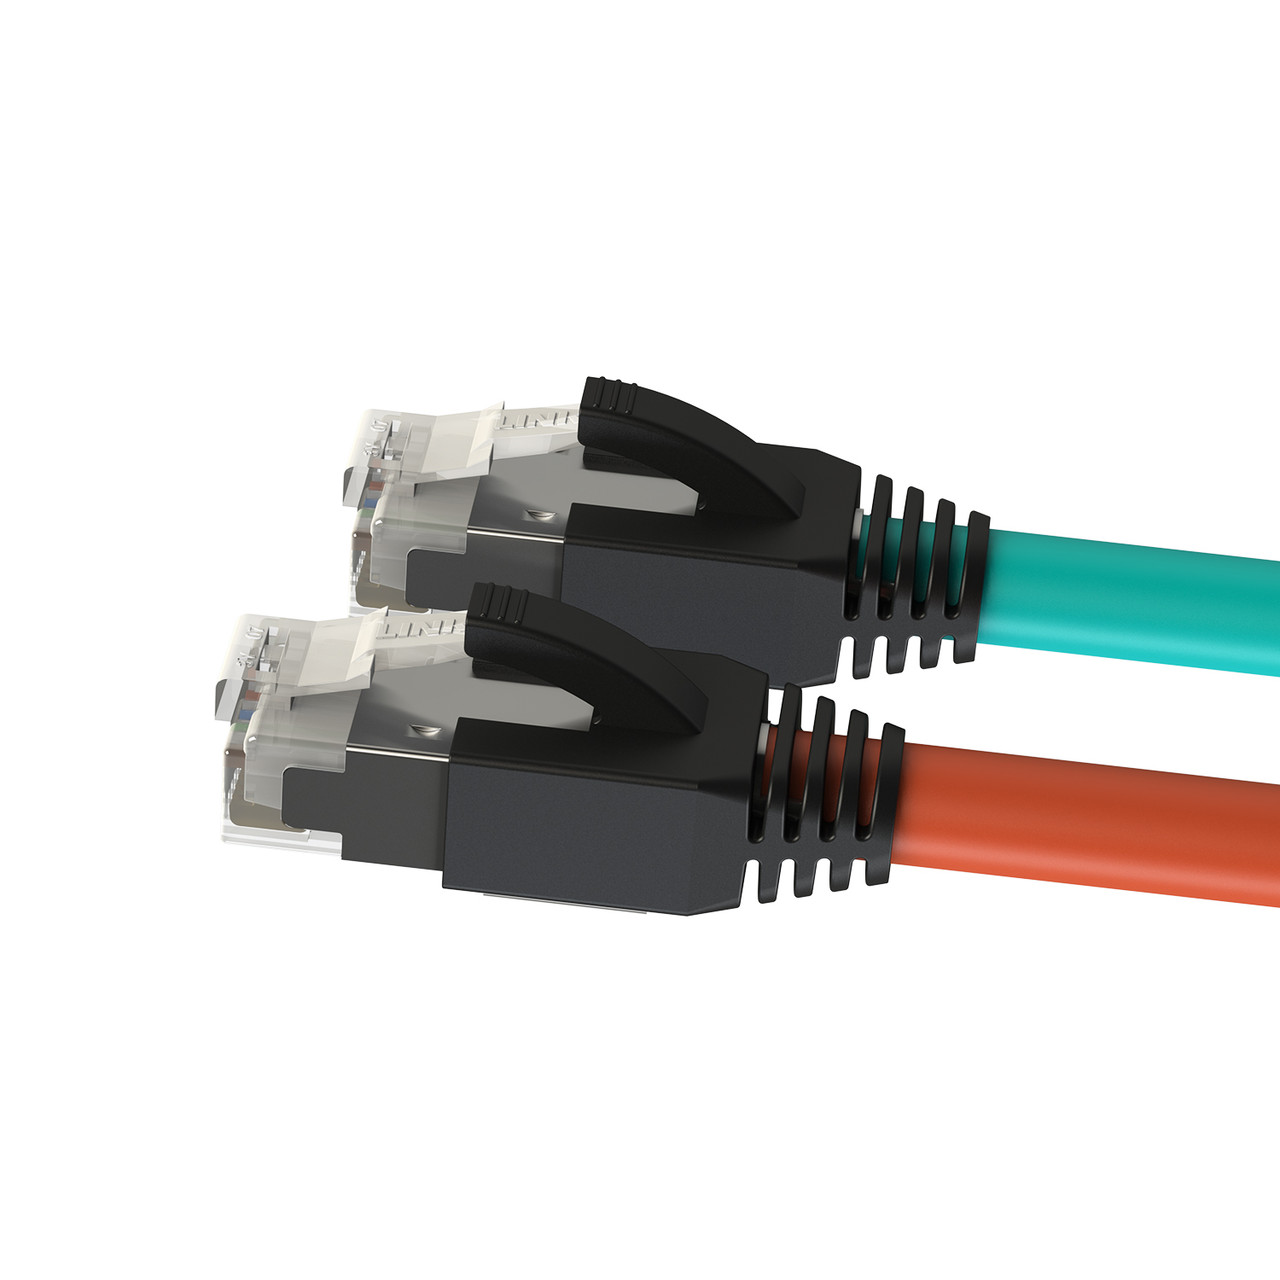 RJ45 Cat6/6a Pass Through Connectors for a Thick 23 AWG Large Diameter UTP  Network Cable, 100 Pcs | Insert Guides Included